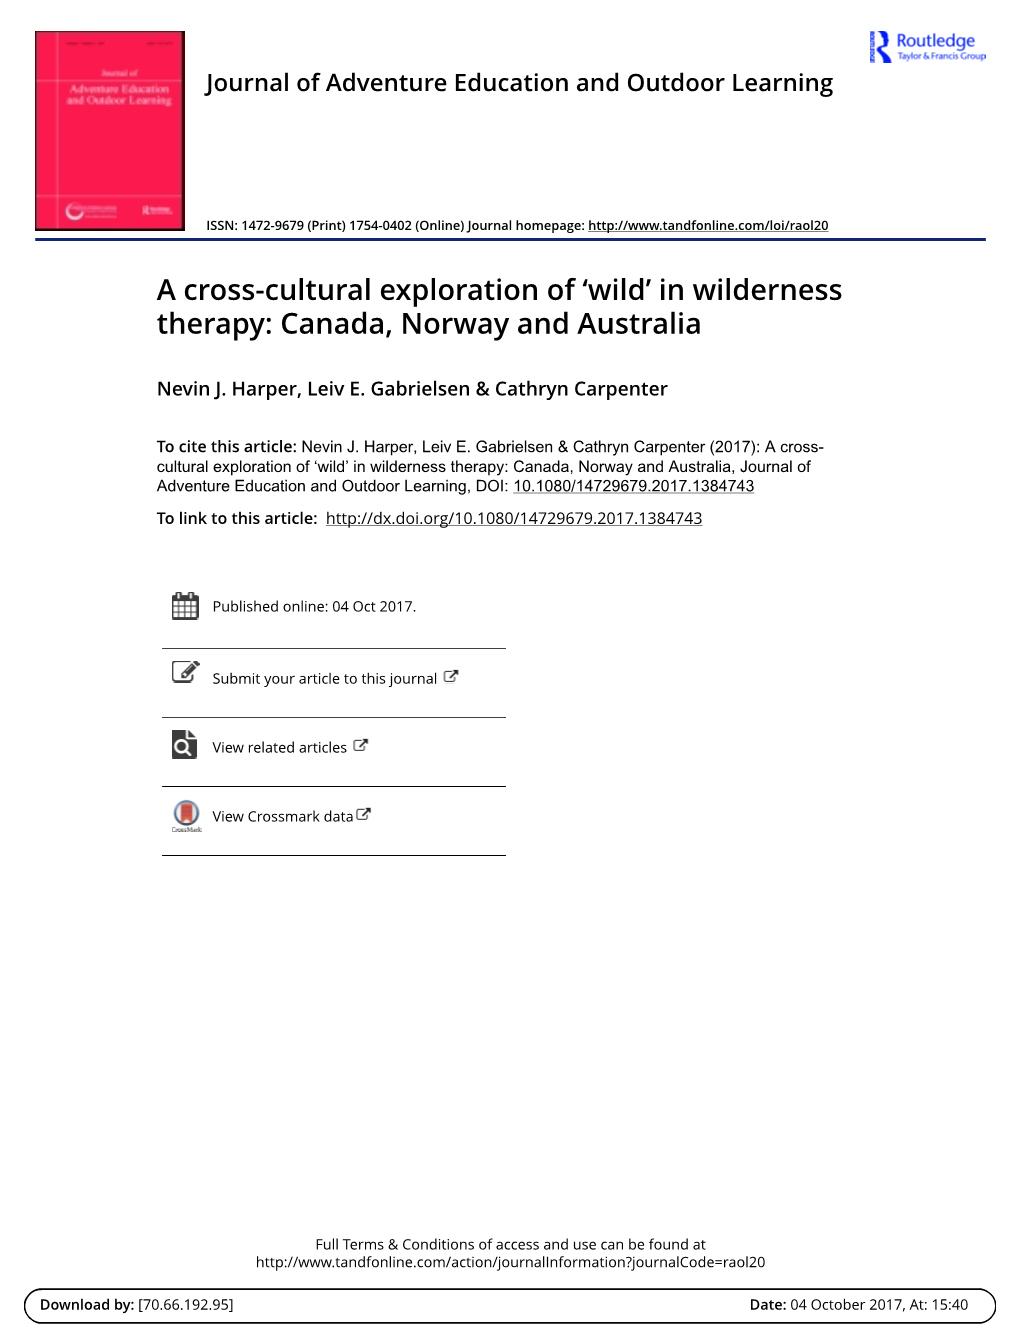 A Cross-Cultural Exploration of 'Wild' in Wilderness Therapy: Canada